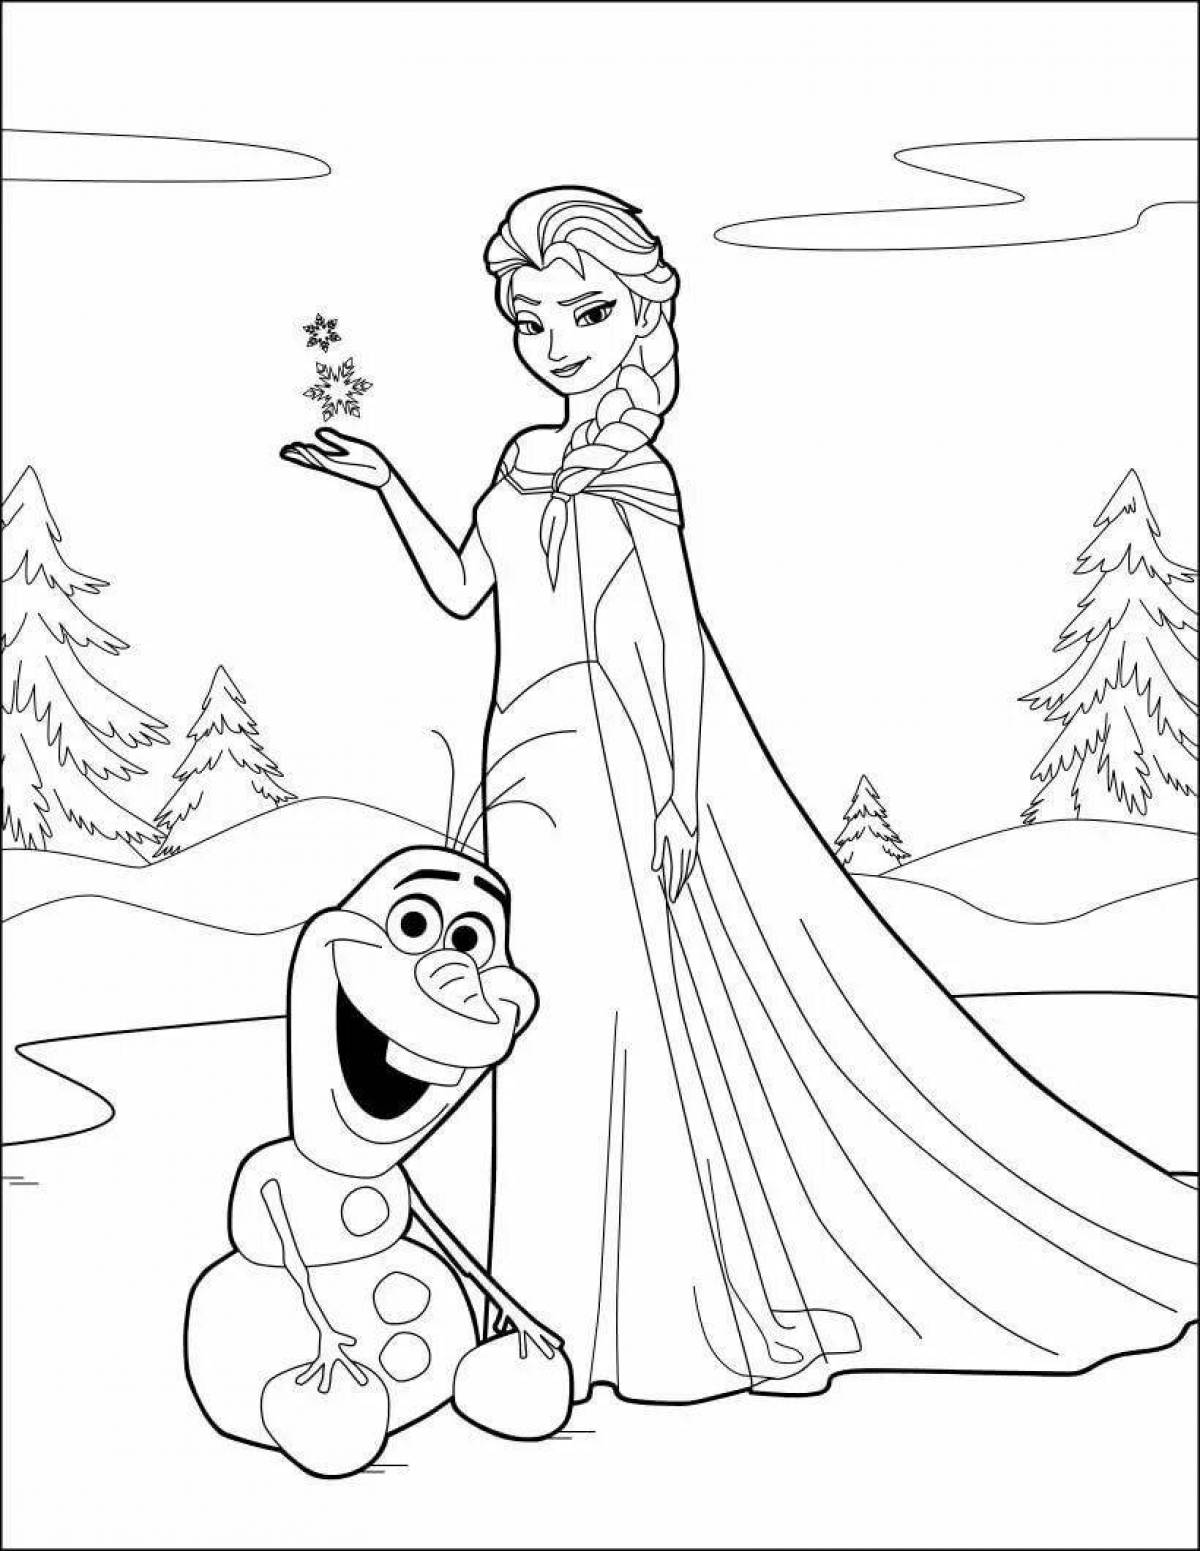 Charming Elsa coloring book for kids 4-5 years old